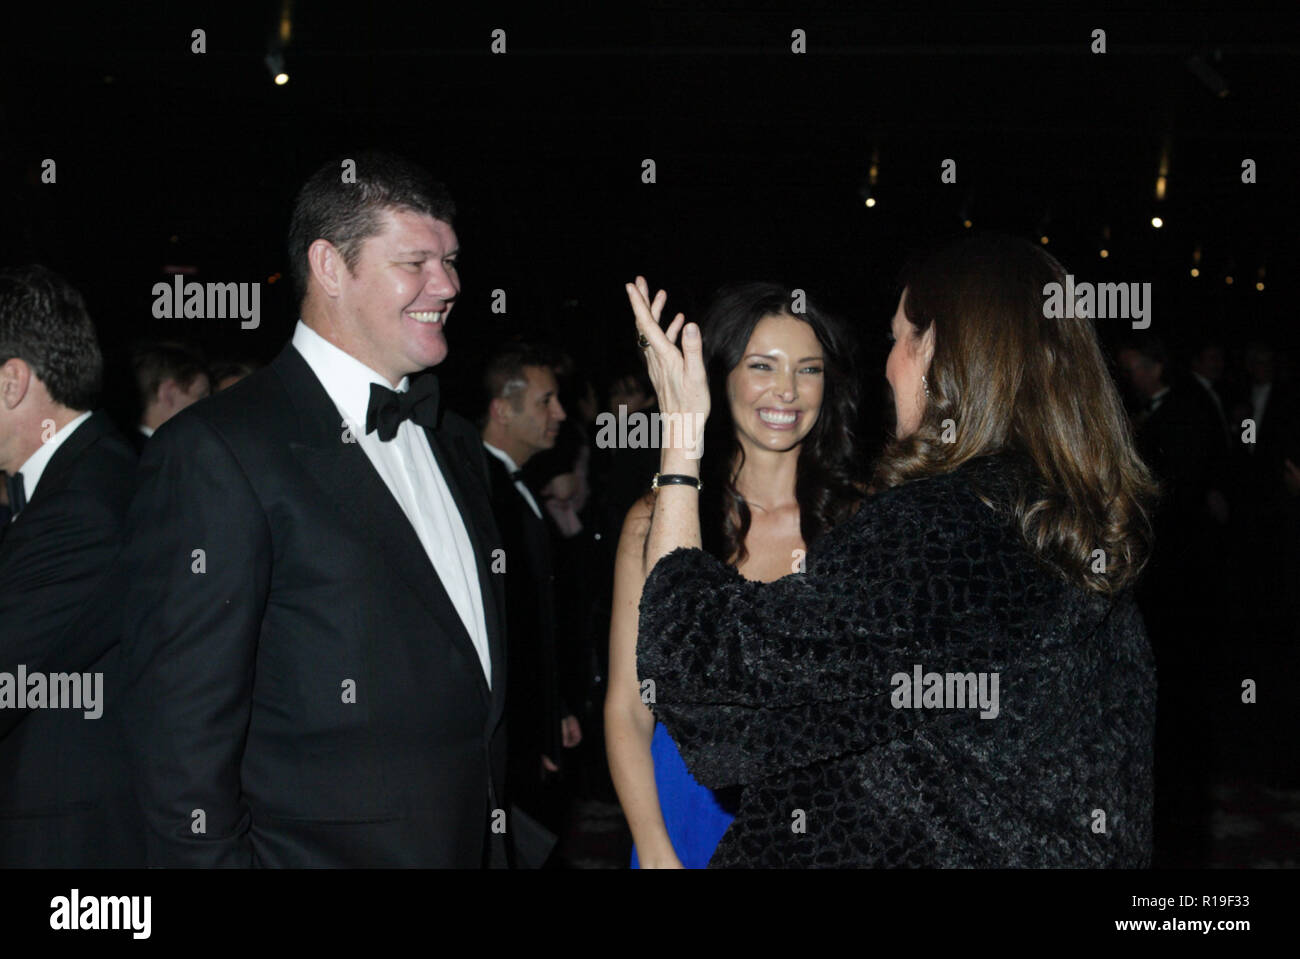 (l-r) James Packer, Erica Packer and Jane Ferguson The Victor Chang 'Heart To Heart' Ball at Sydney Convention and Exhibition Centre. Sydney, Australia - 01.08.09. Stock Photo